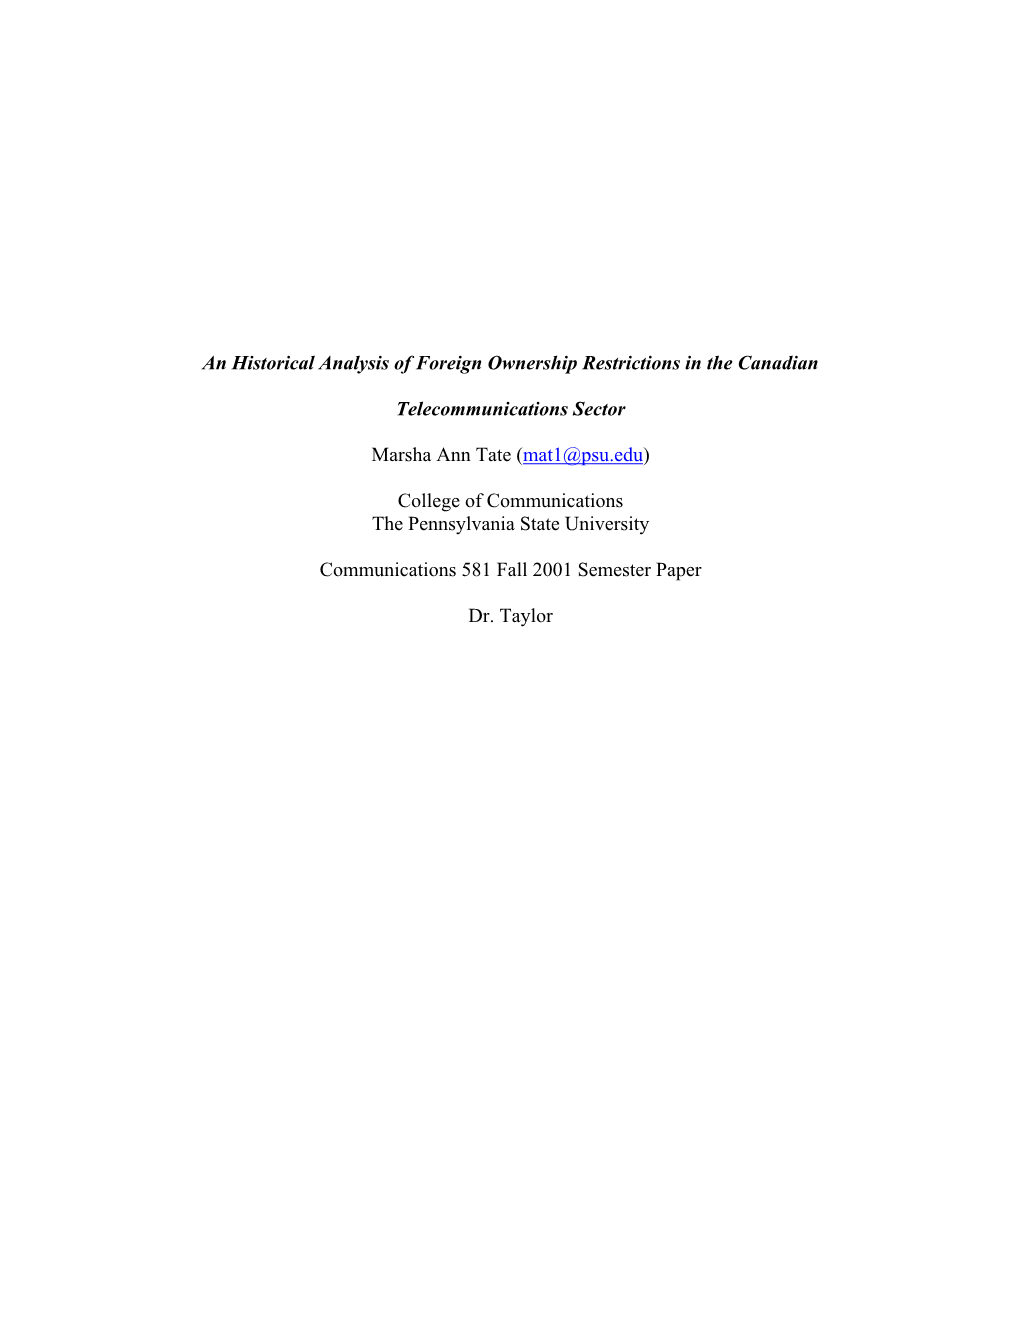 An Historical Analysis of Foreign Ownership Restrictions in the Canadian